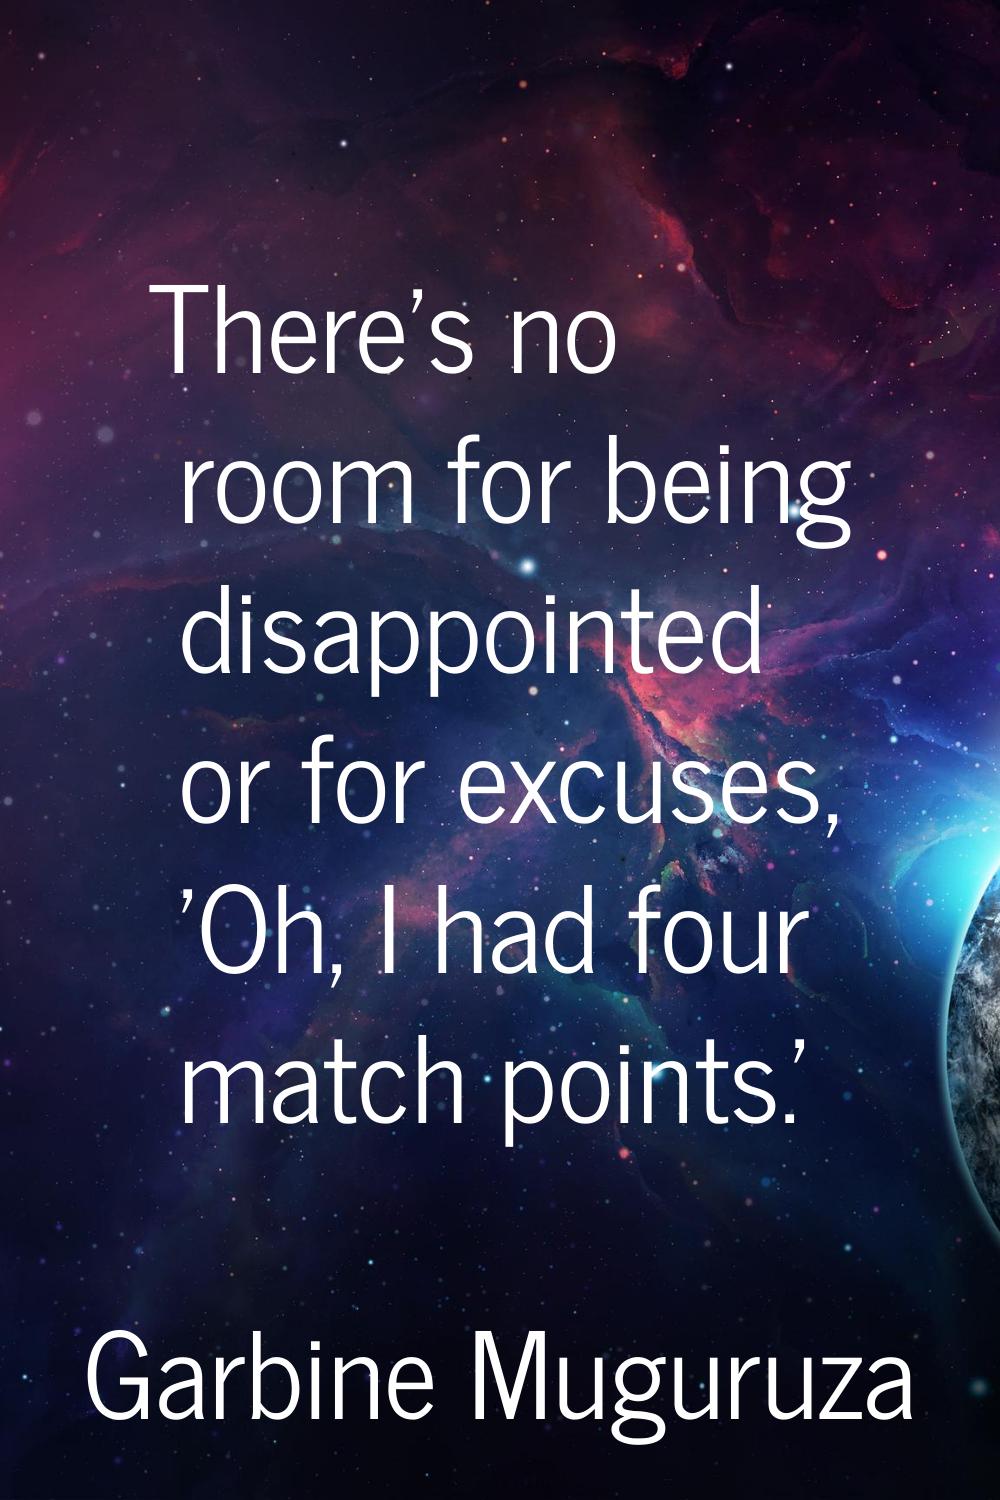 There's no room for being disappointed or for excuses, 'Oh, I had four match points.'